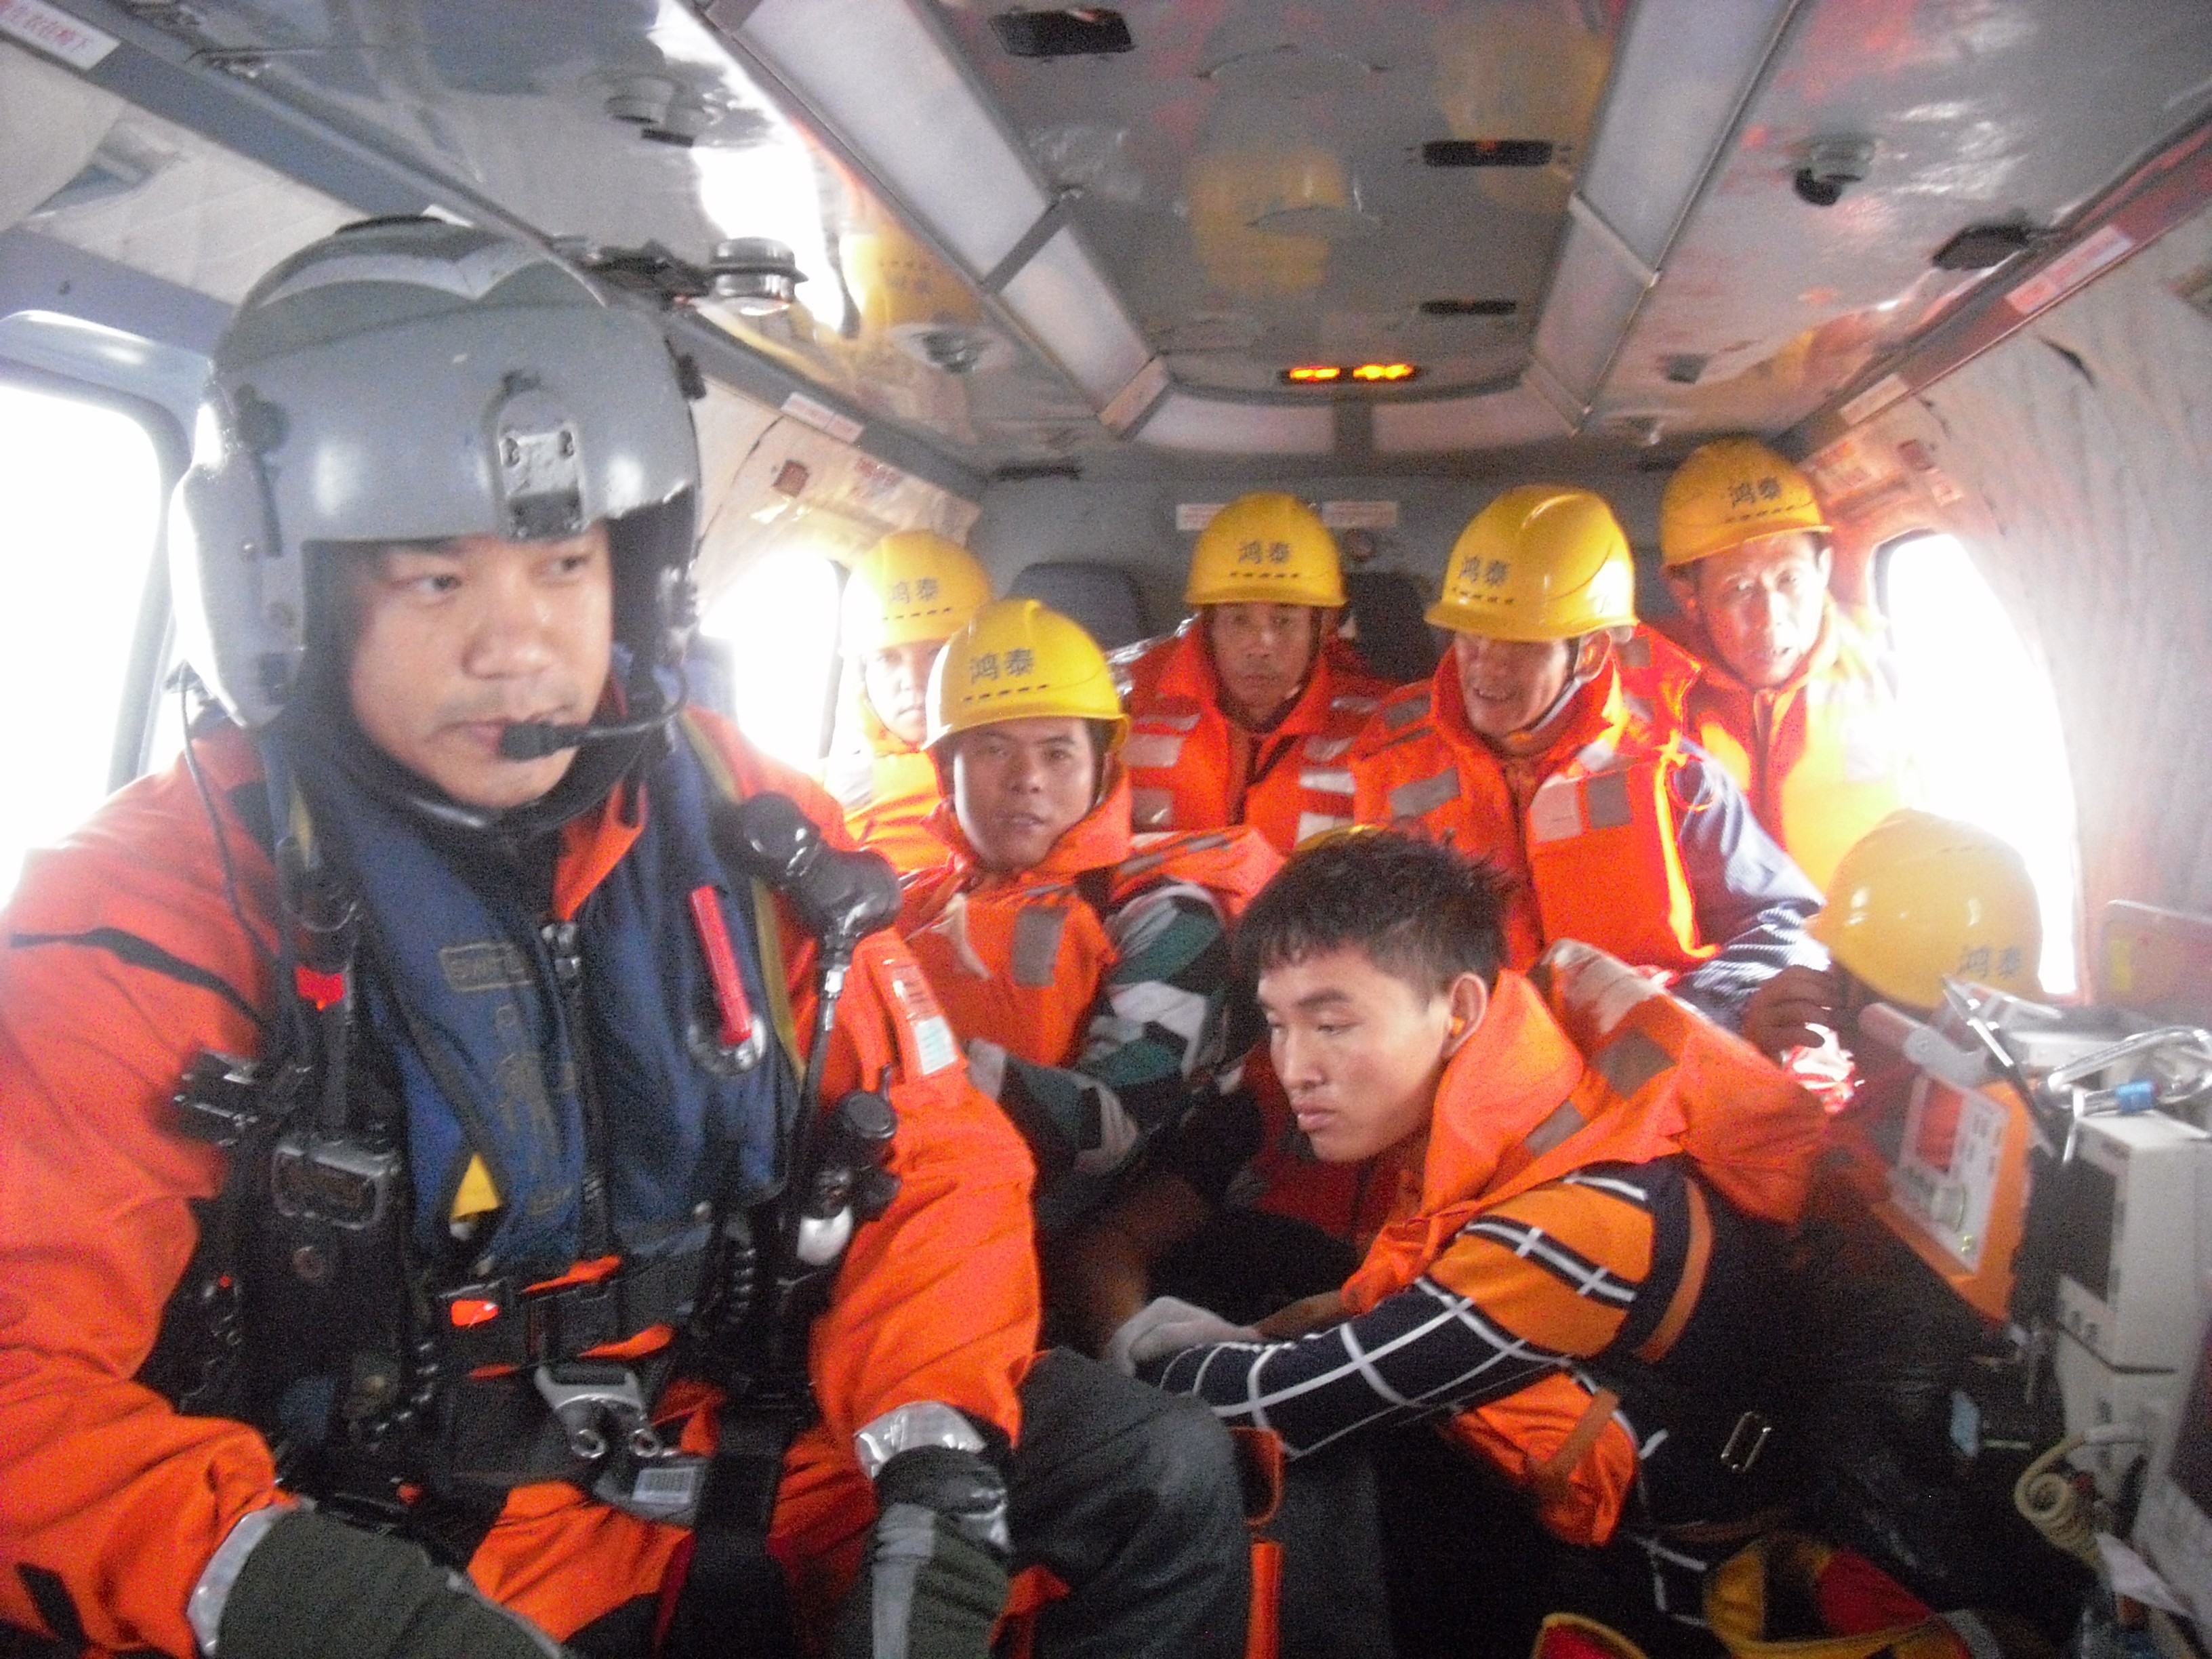 Hikers rescued on Kowloon Peak jeopardised the safety of 160 firefighters and cost badly needed resources